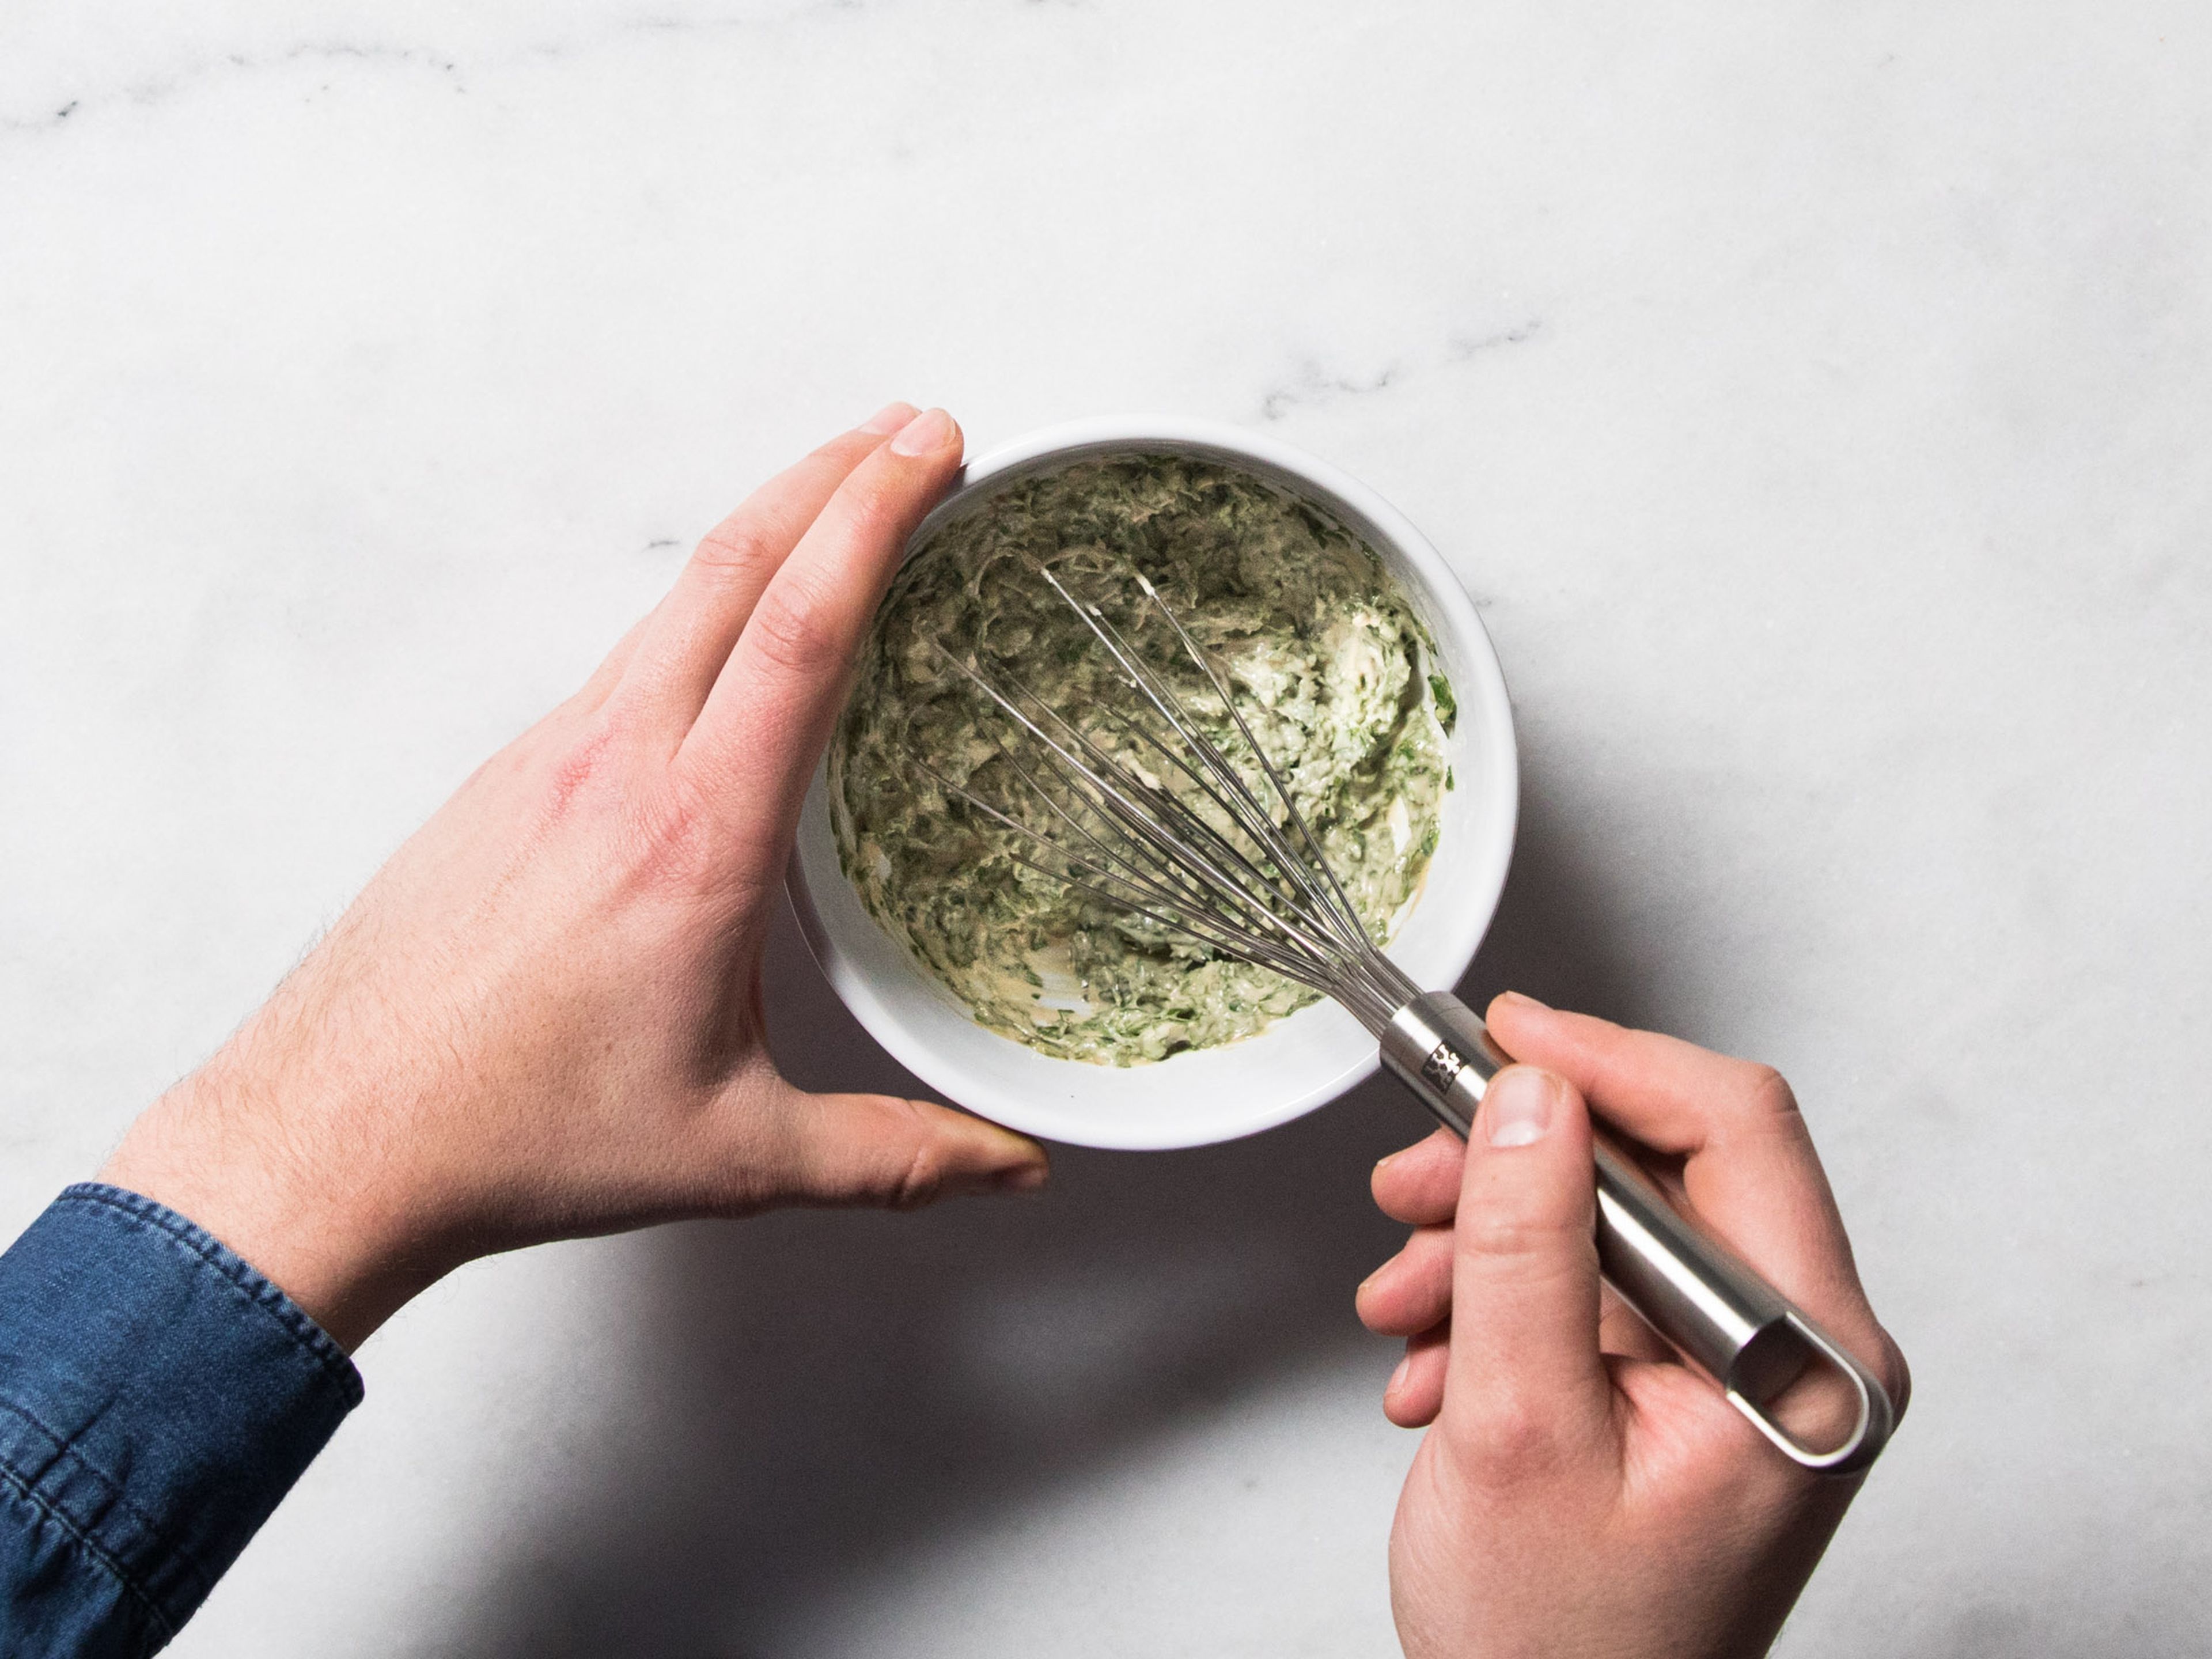 In the meantime, finely chop parsley and mint. Add chopped herbs, tahini, unfiltered apple juice, and lemon juice to a bowl and stir to combine. Season with salt and pepper to taste. If the mixture is too thick, add a little water to help reach a creamy consistency.